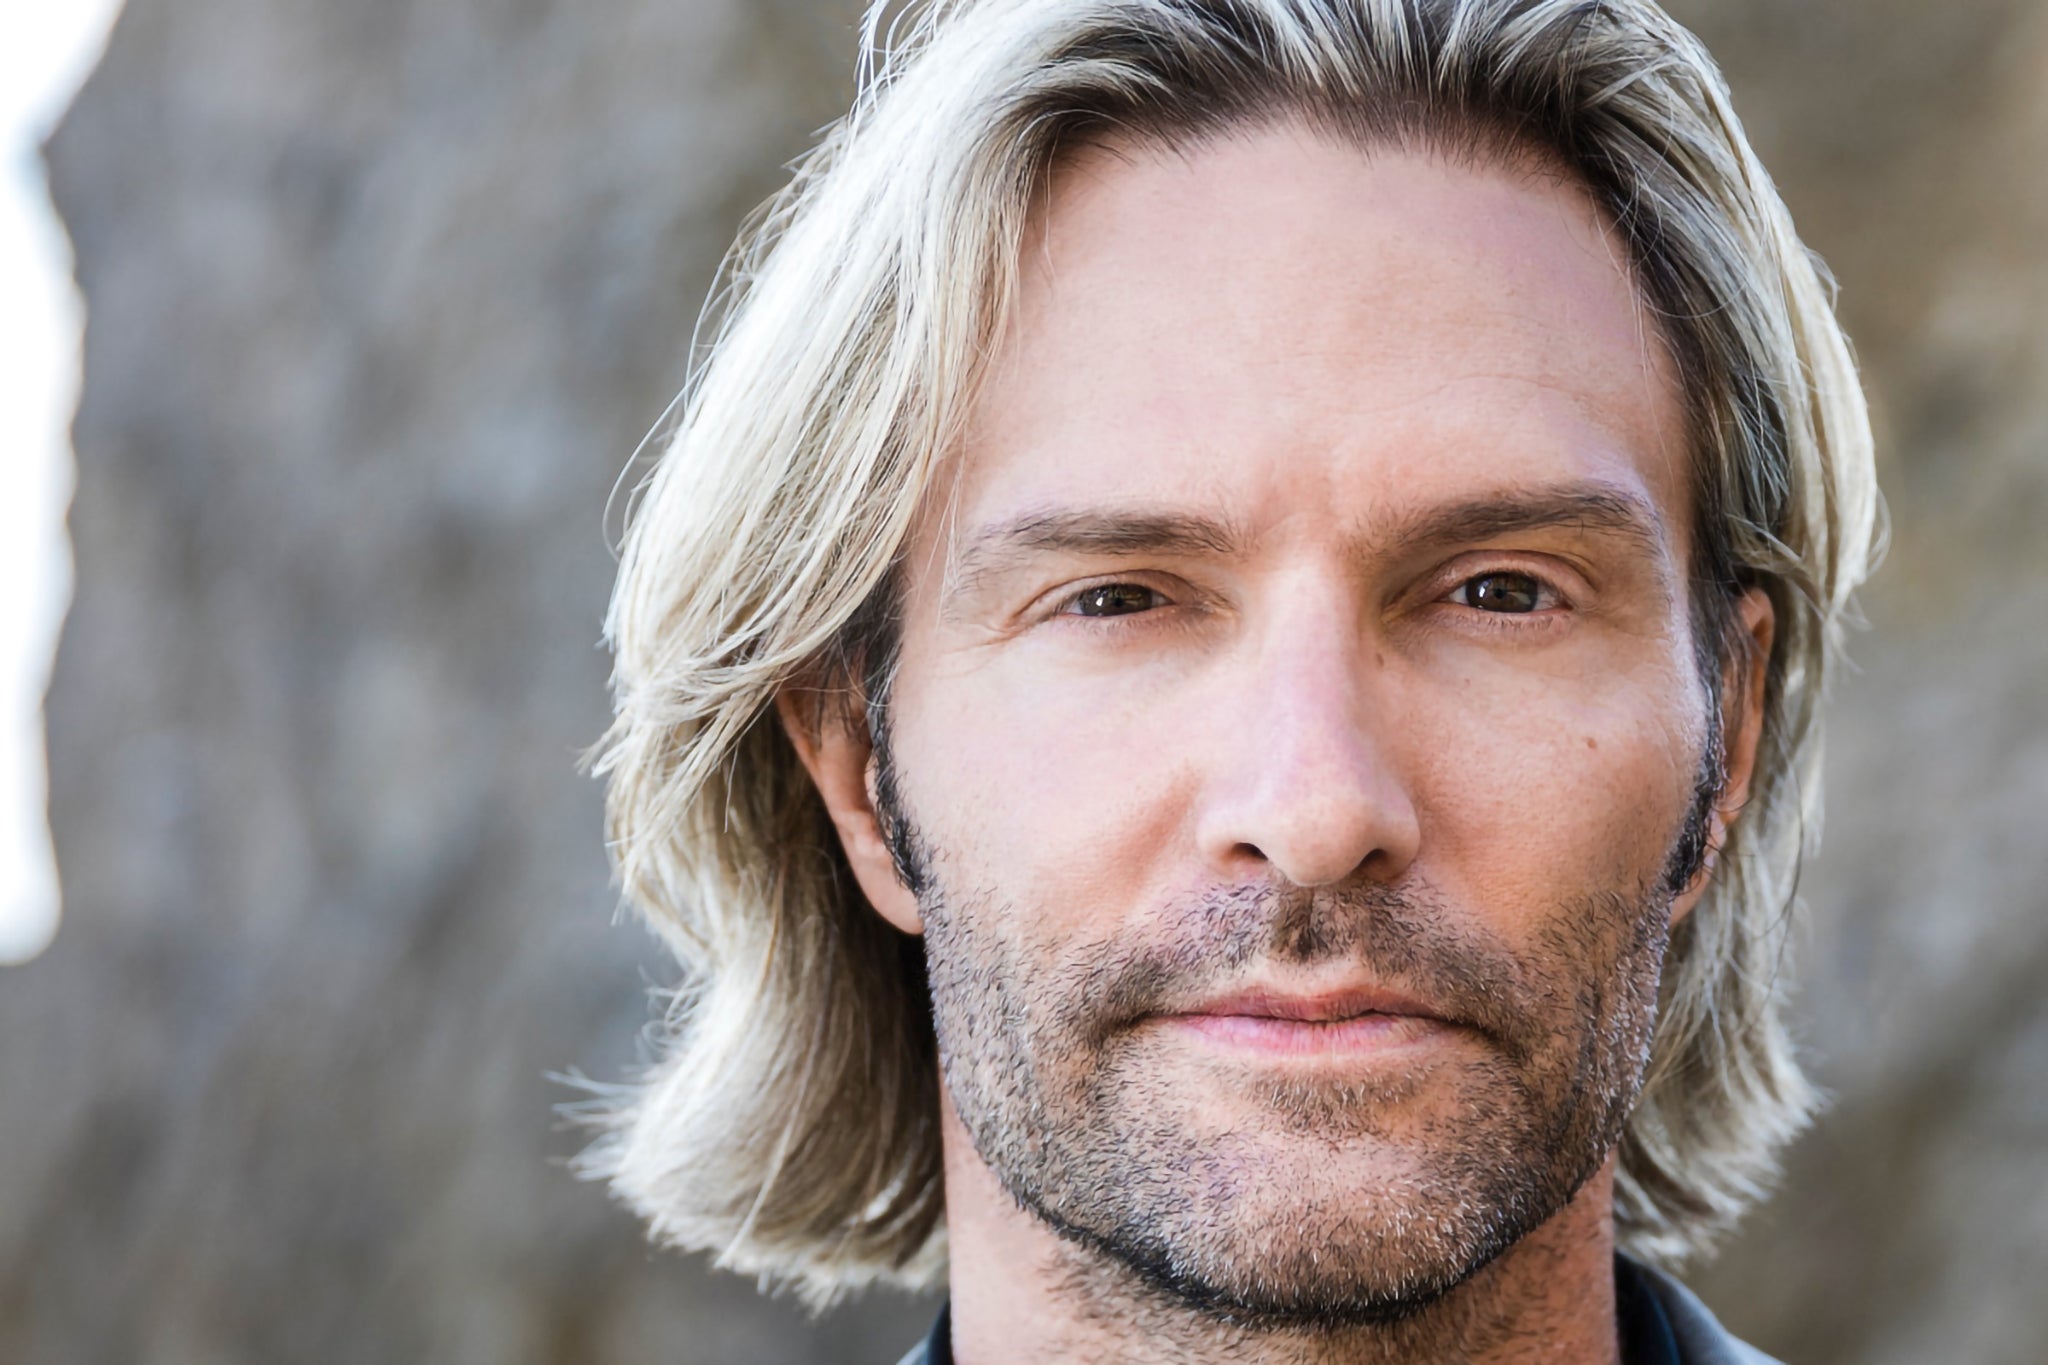 Image used with permission from Ticketmaster | An evening with Eric Whitacre & Voices New Zealand tickets